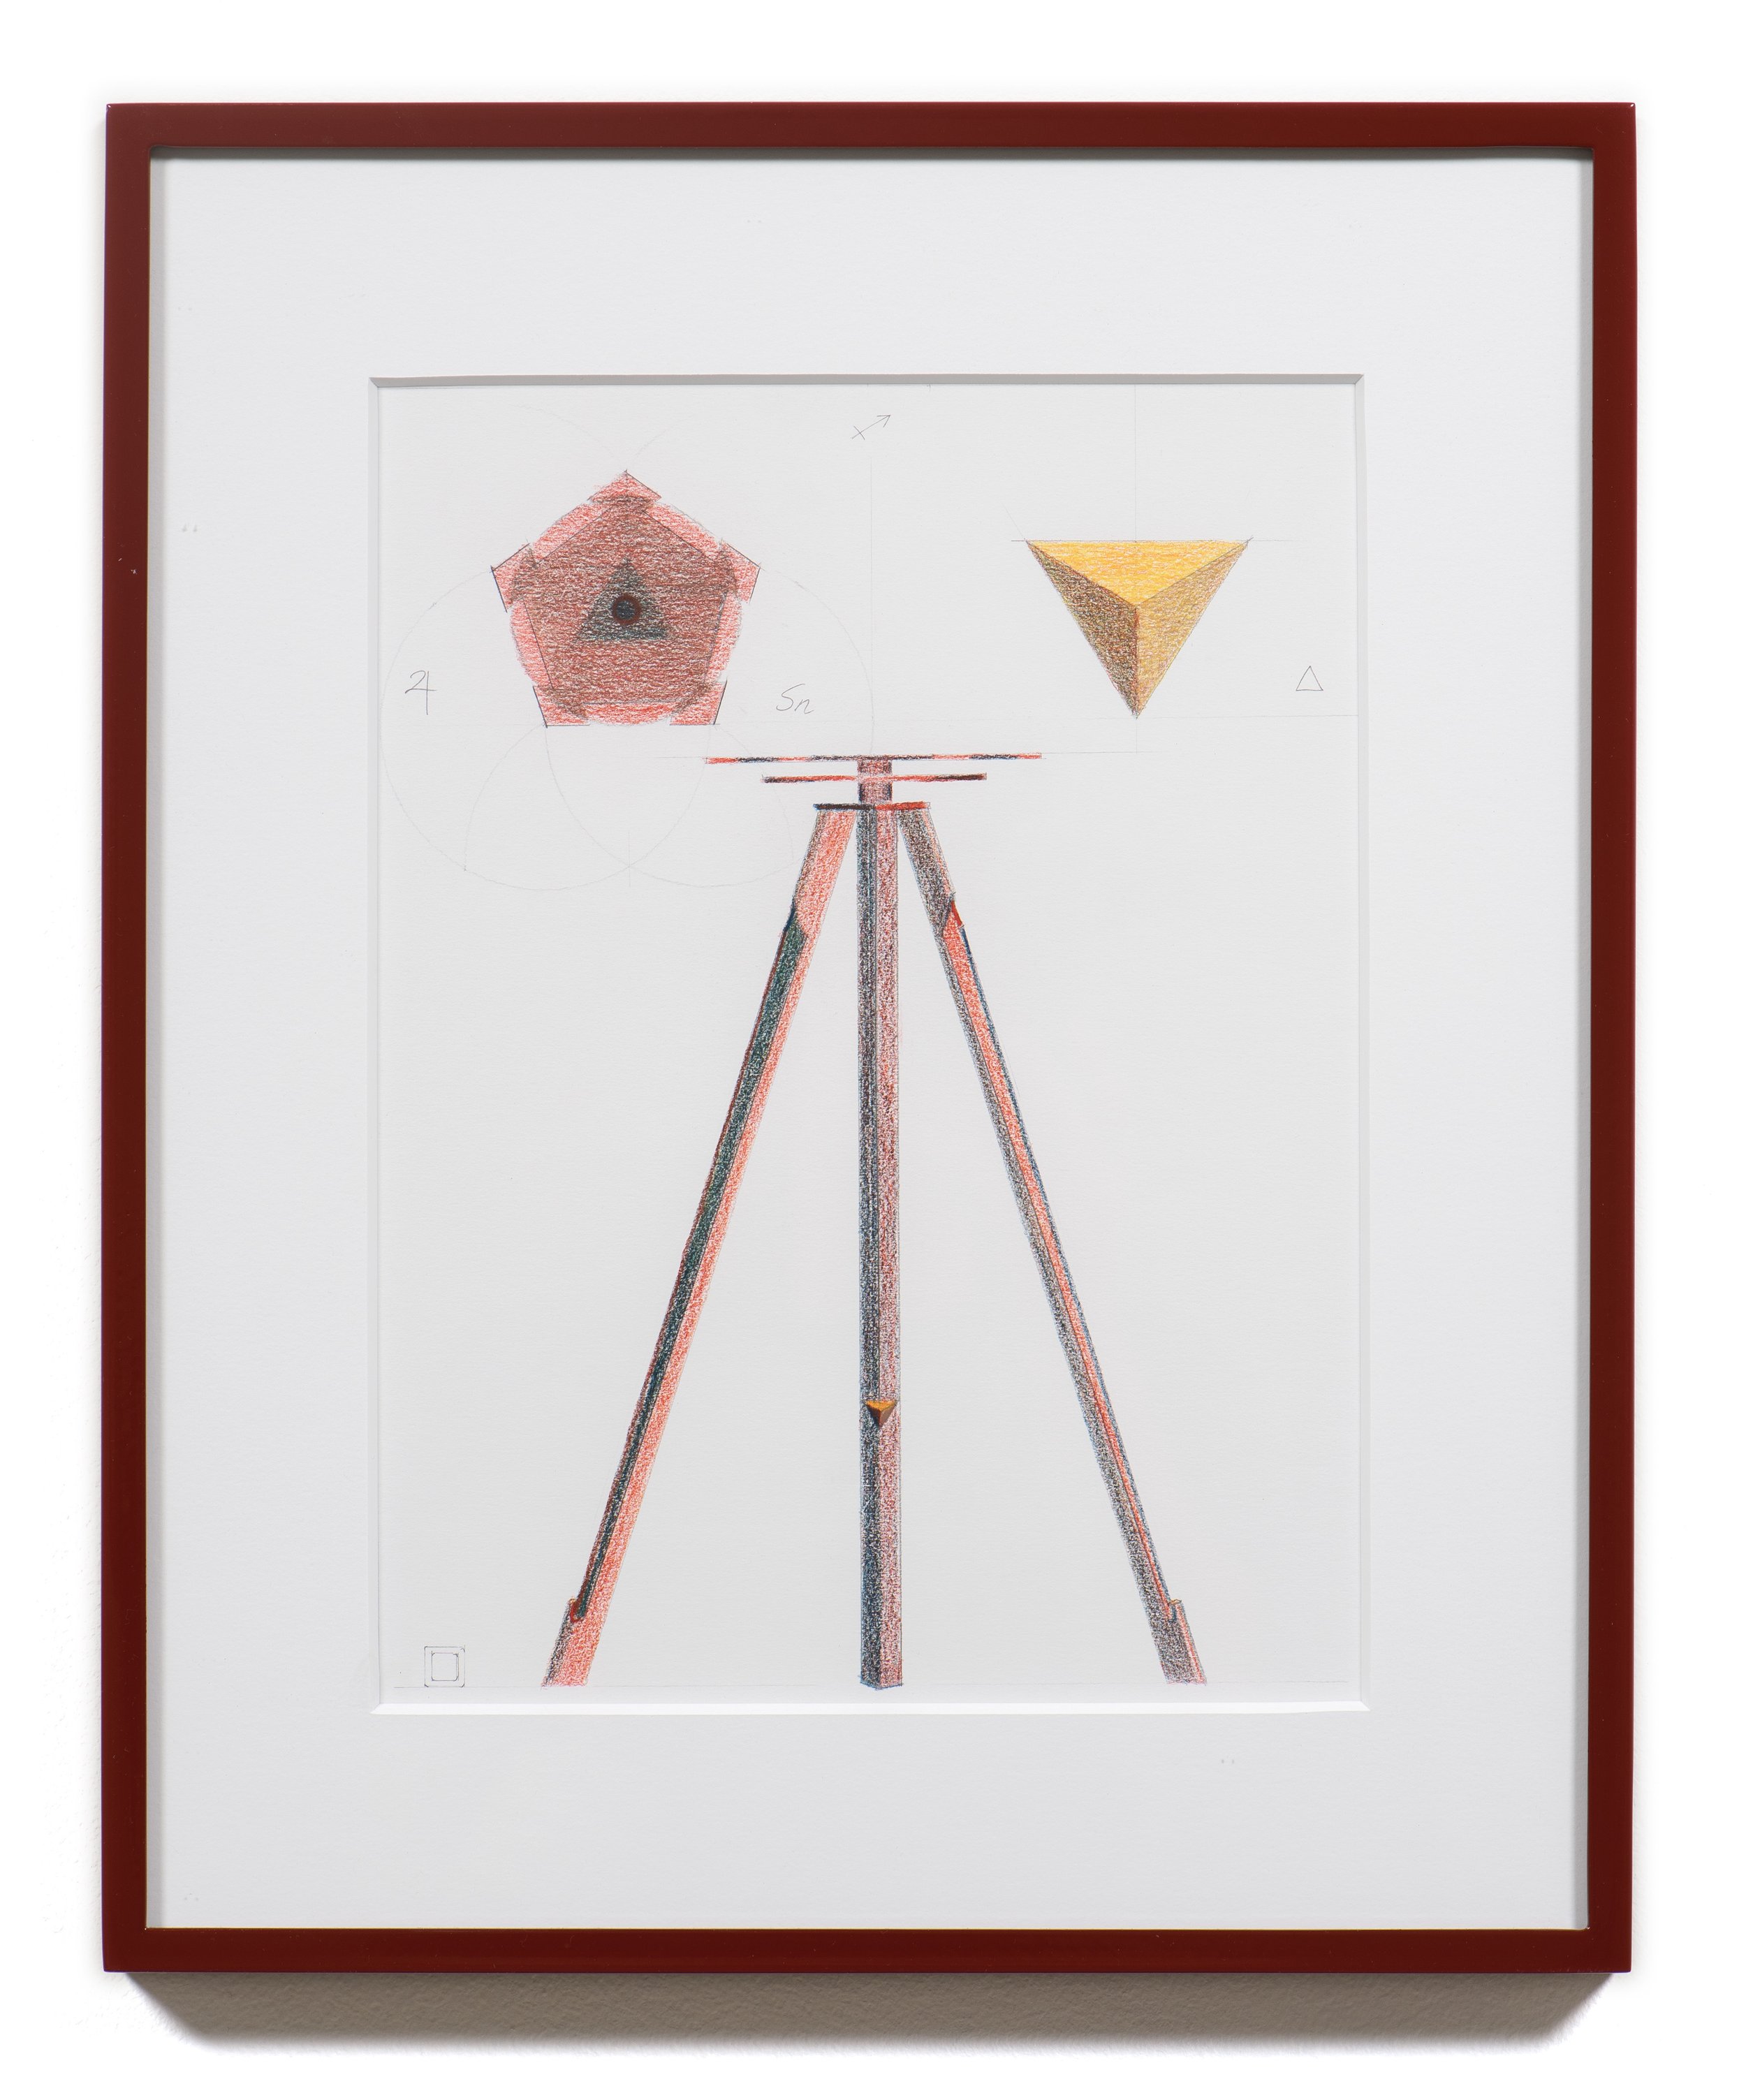  Kylie White  240-270,  2021 Colored pencil and graphite on paper, artist’s frame 16 3/4 x 13 3/4 x 1 1/4 inches 